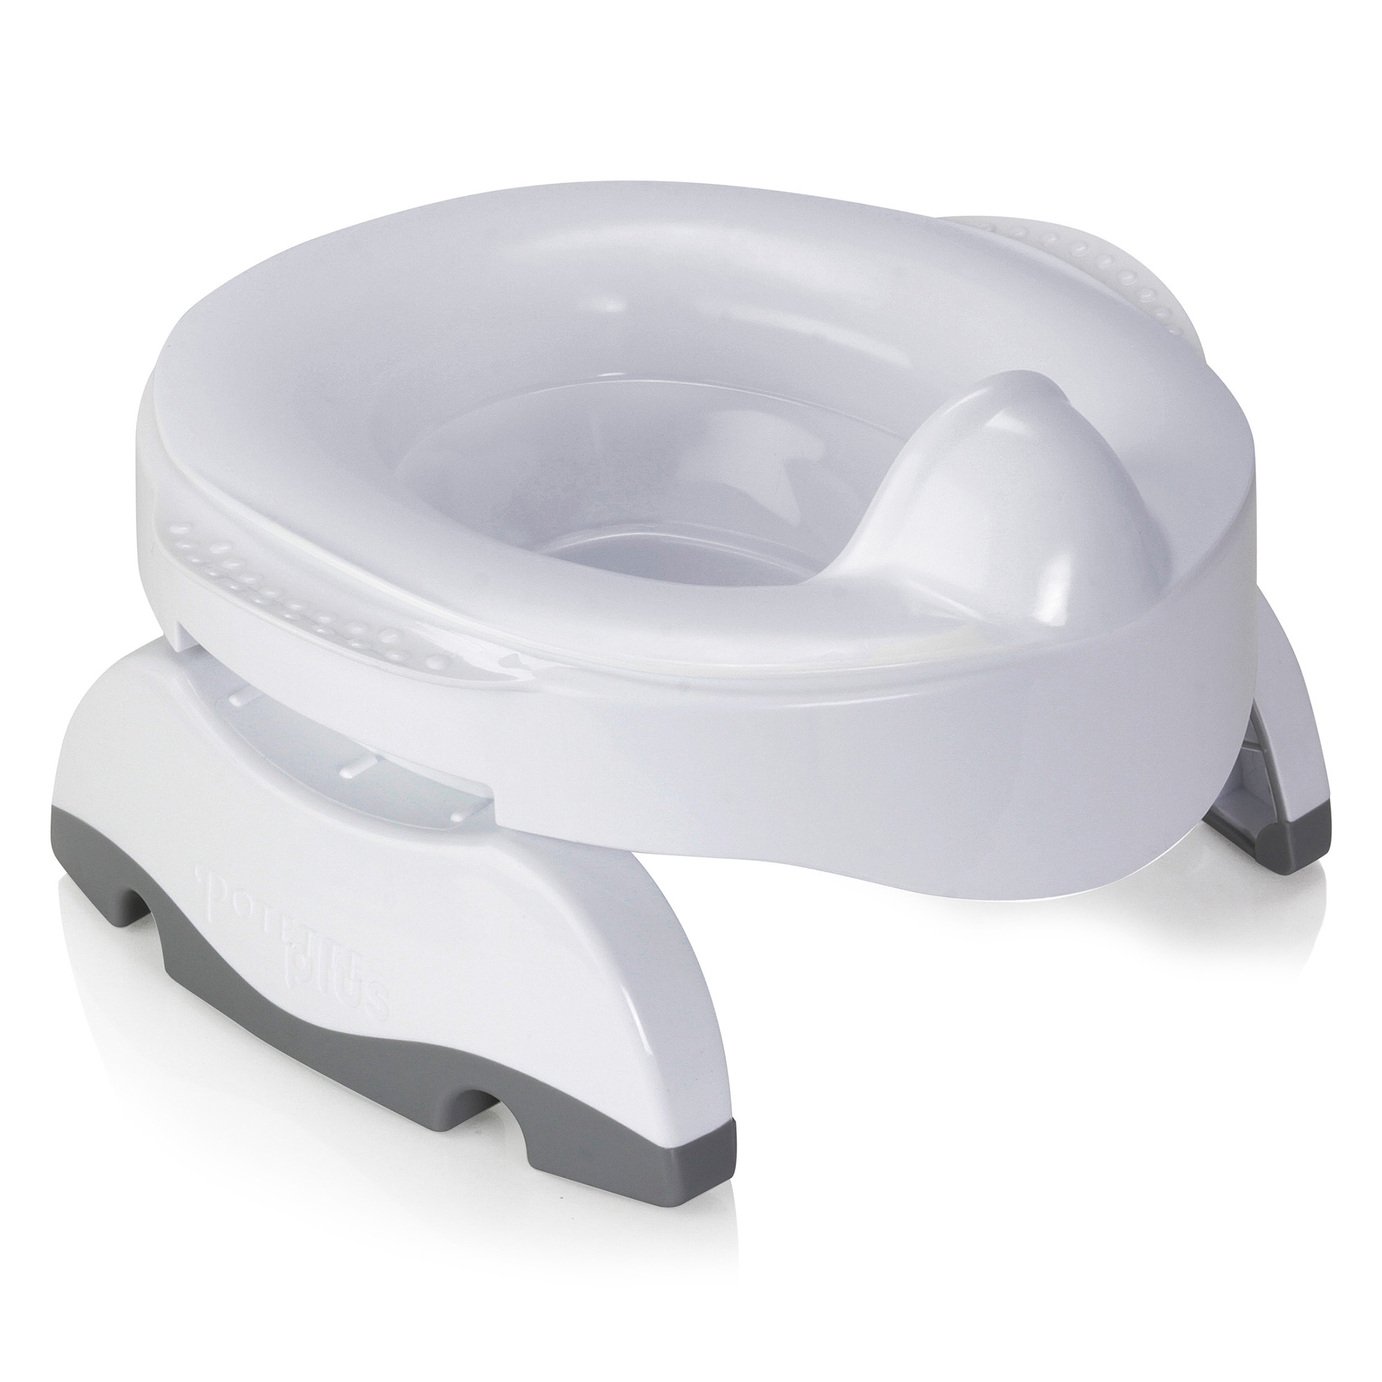 Potette Max Portable Potty & Toilet Trainer Seat with Liners